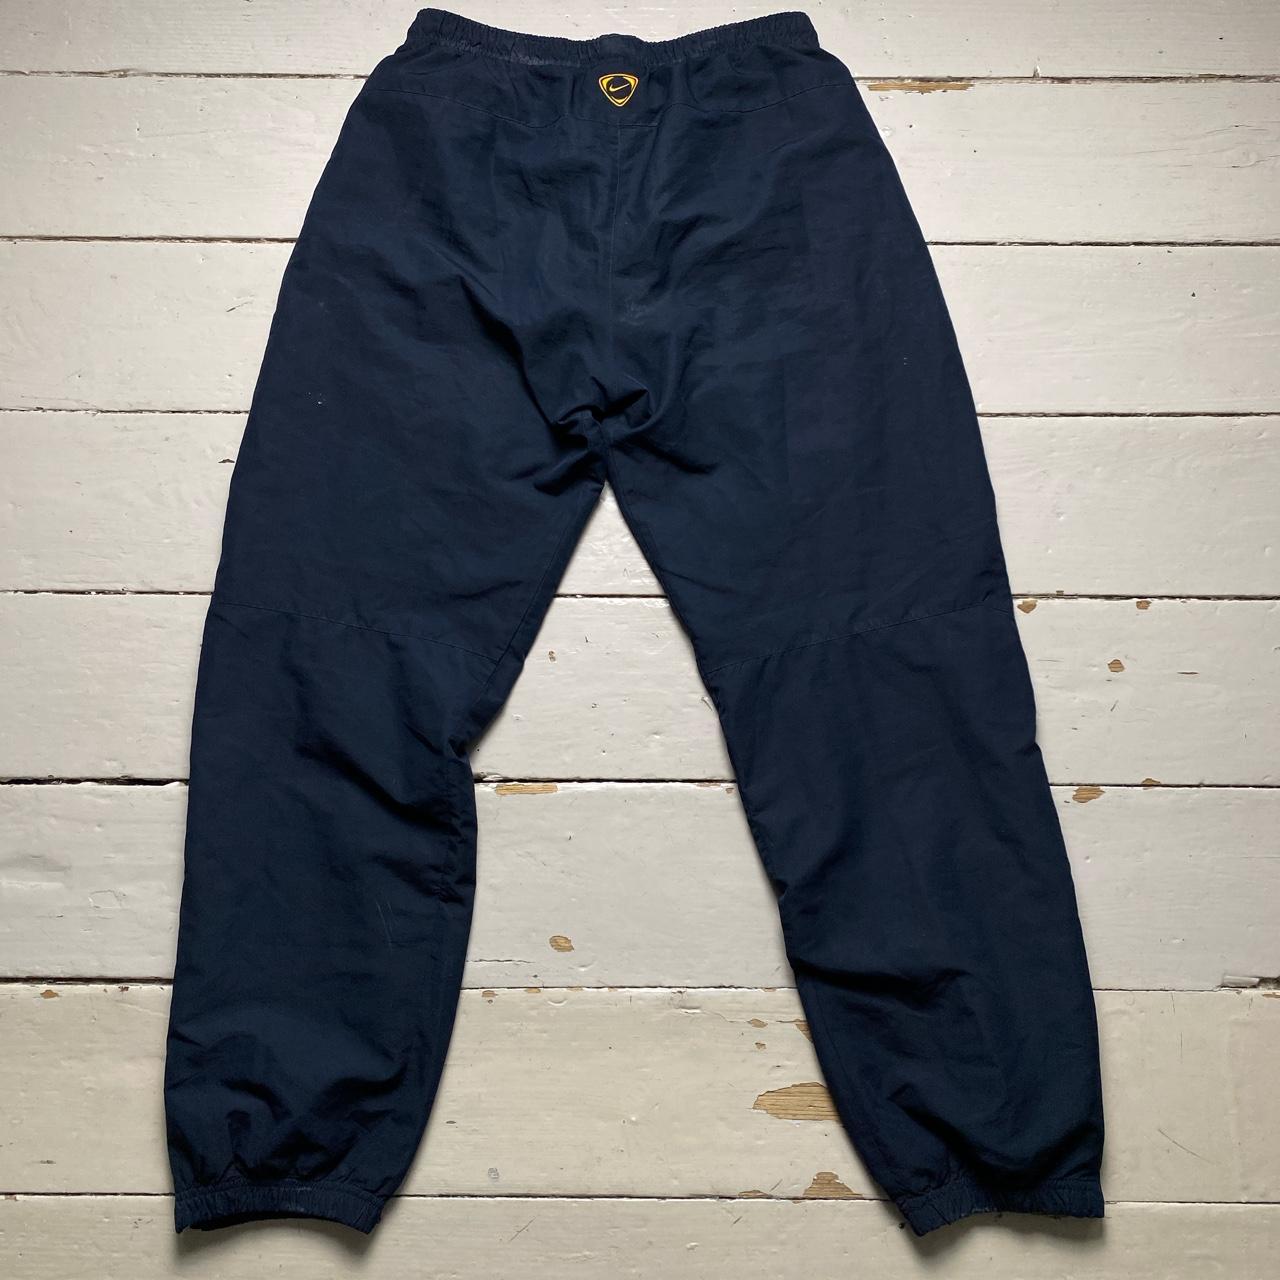 Nike Football Arsenal Vintage y2k Navy and Yellow Swoosh Shell Trackpant Bottoms